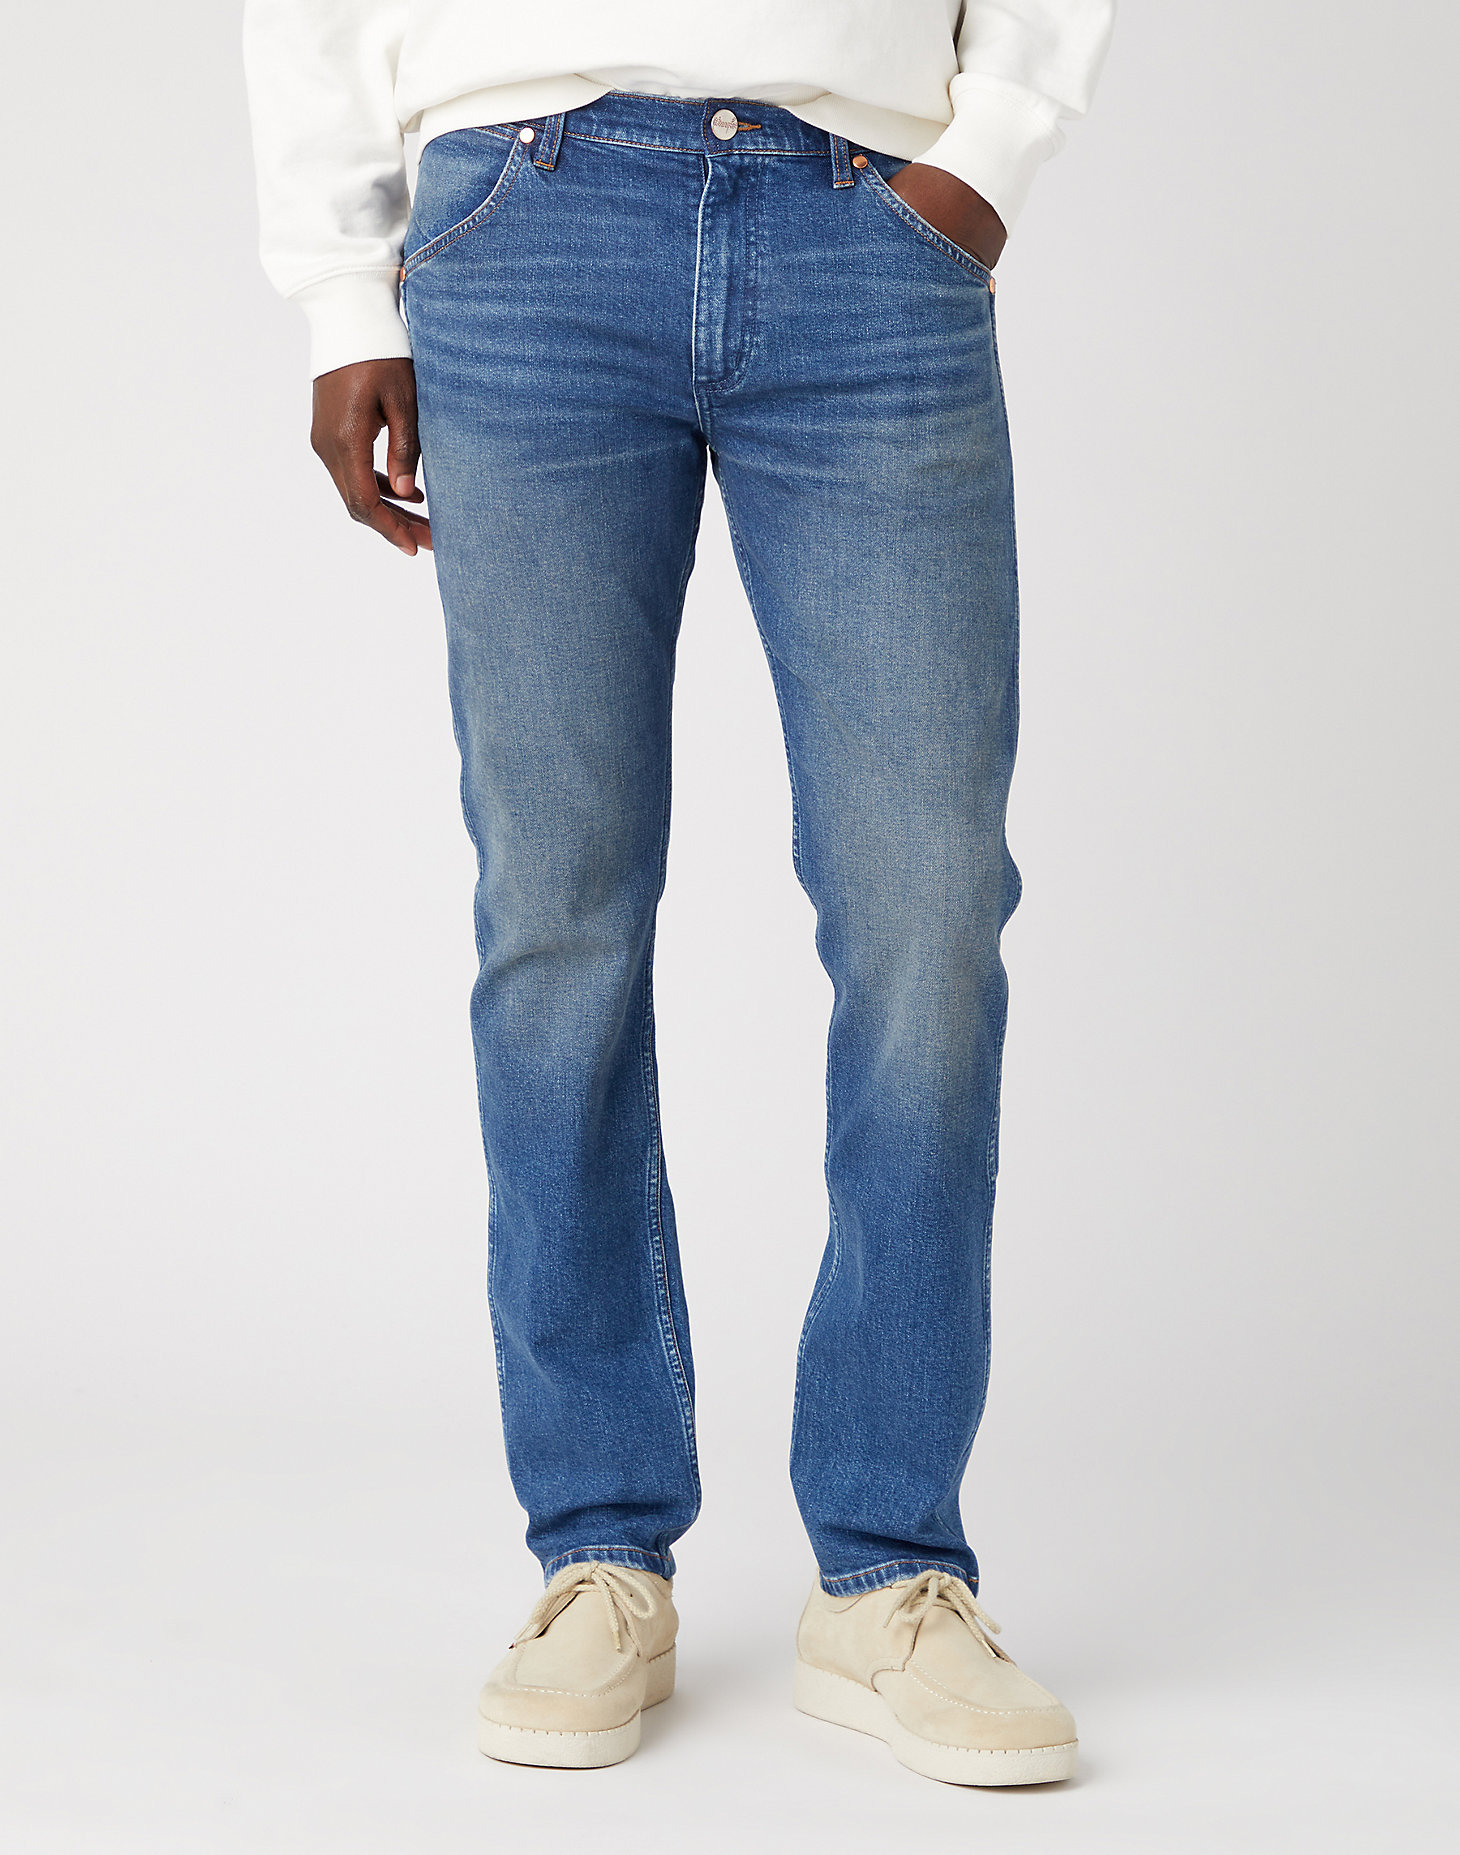 Indigood Icons 11MWZ Western Slim Jeans in Wranch main view